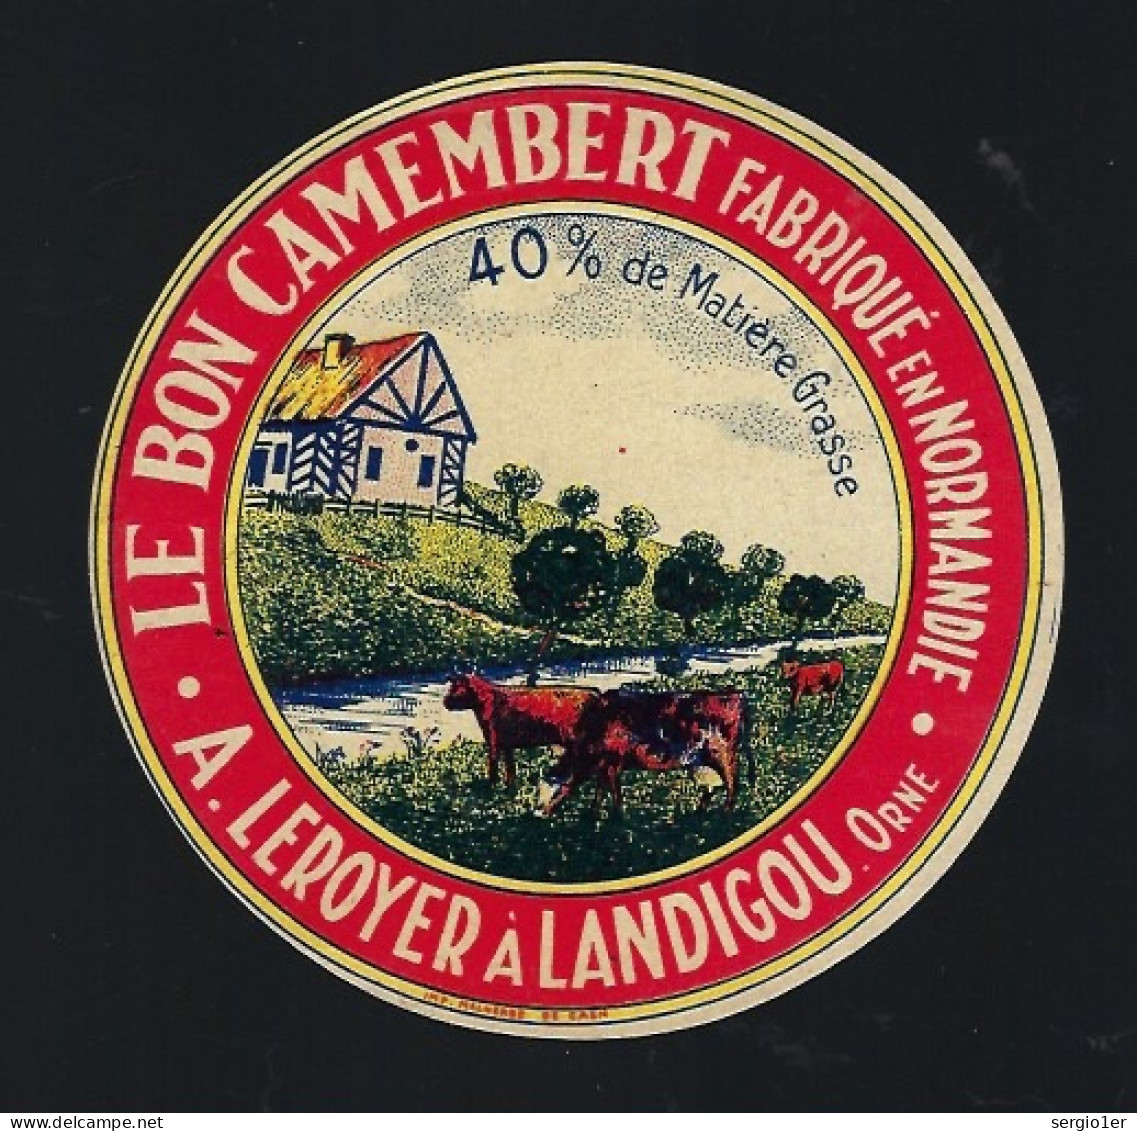 Etiquette Fromage Camembert Normandie 40%mg A Leroyer Langidou Orne 61 - Kaas